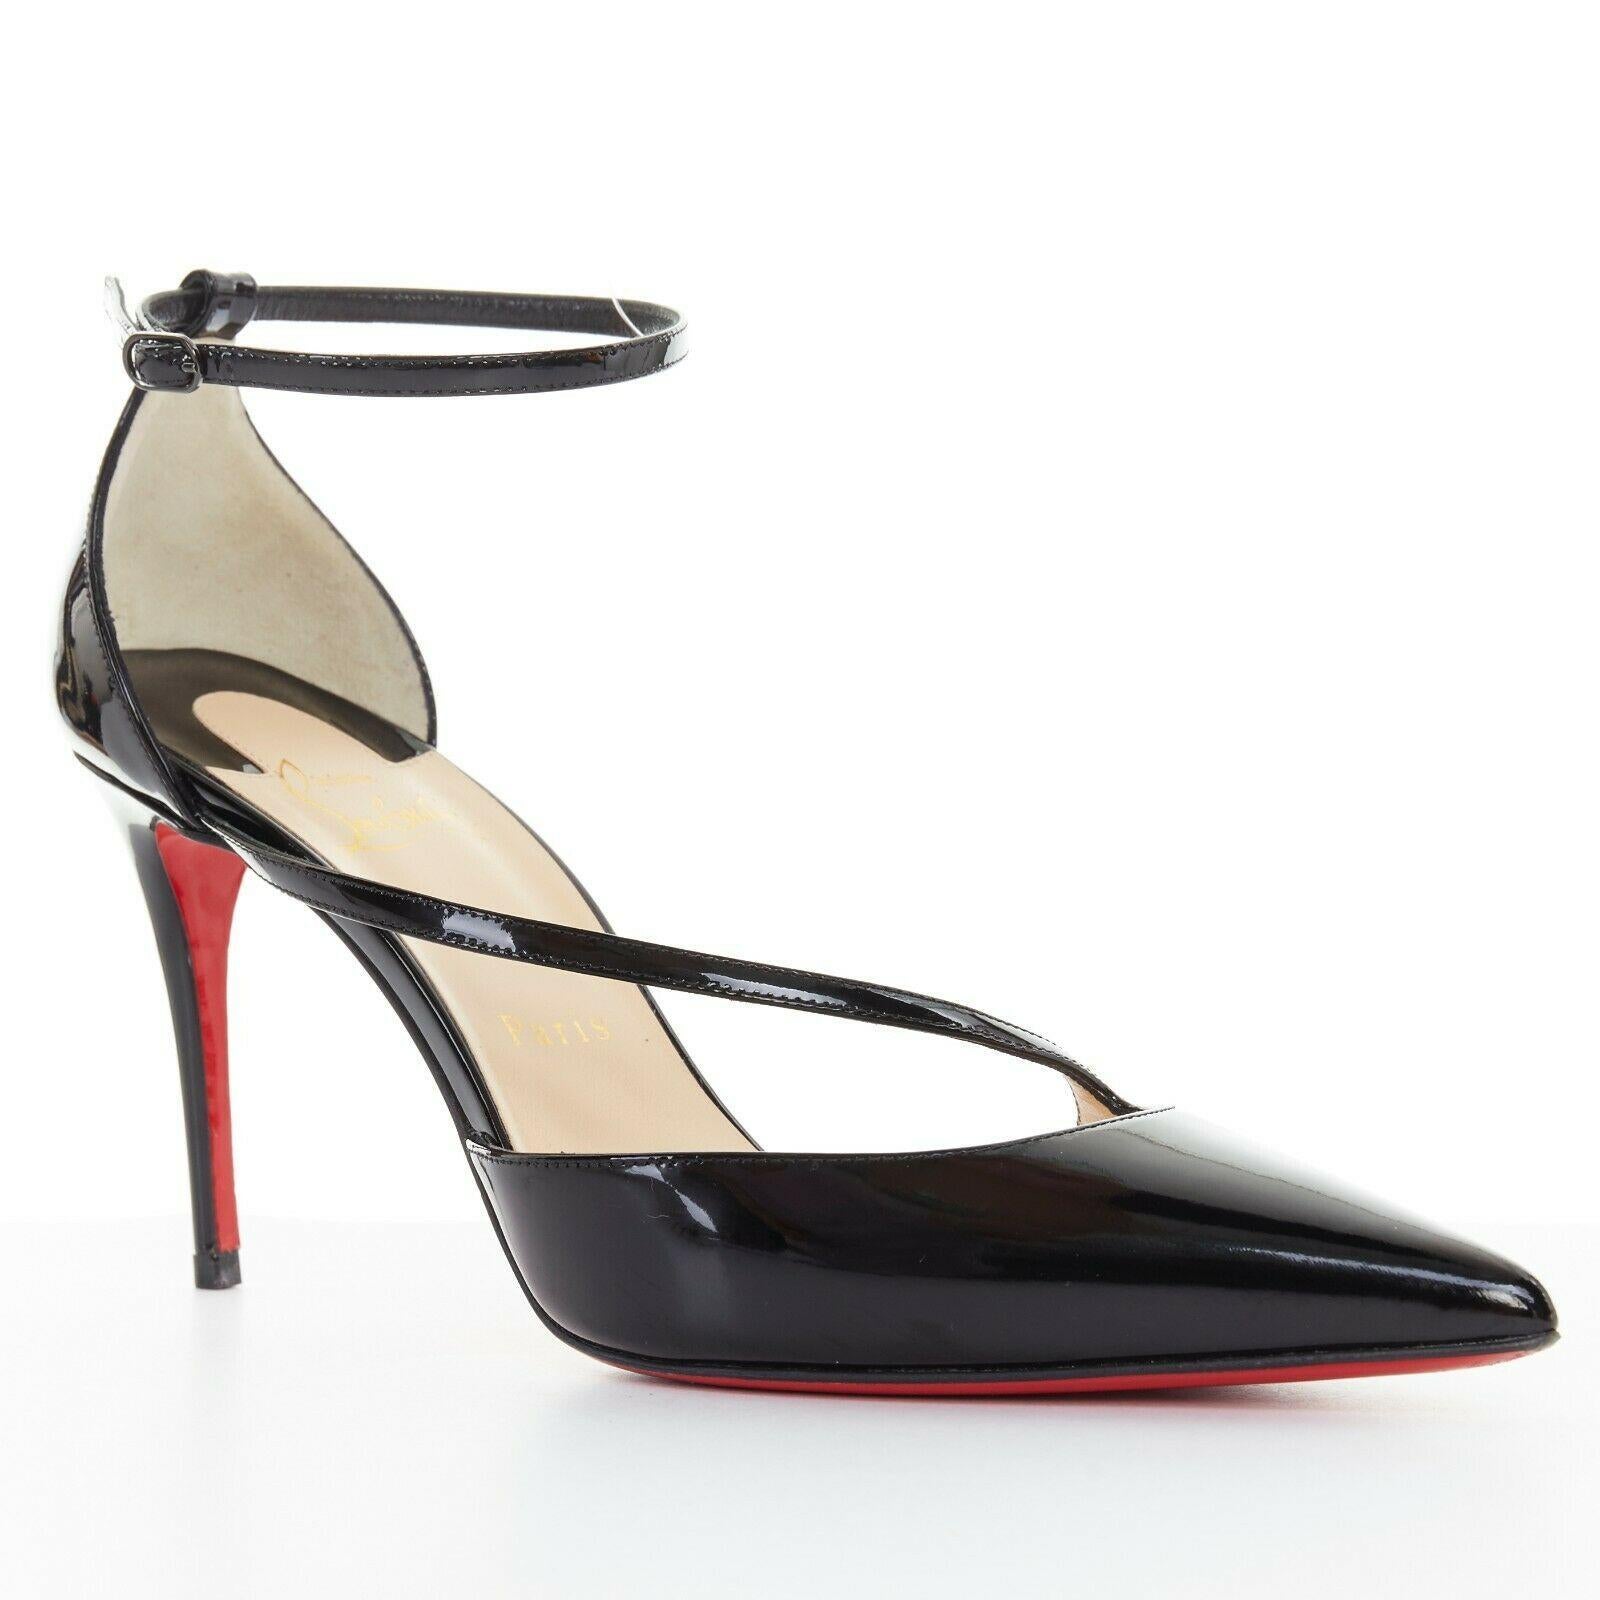 CHRISTIAN LOUBOUTIN Fliketta 85 black patent cross strap dorsay pump EU38
CHRISTIAN LOUBOUTIN
Fliketta 85. Black patent leather. Dorsay silhouette. 
Cross over strap at vamp. Covered heel. Ankle strap. Silver-tone metal buckle. 
Pointed toe.Stiletto